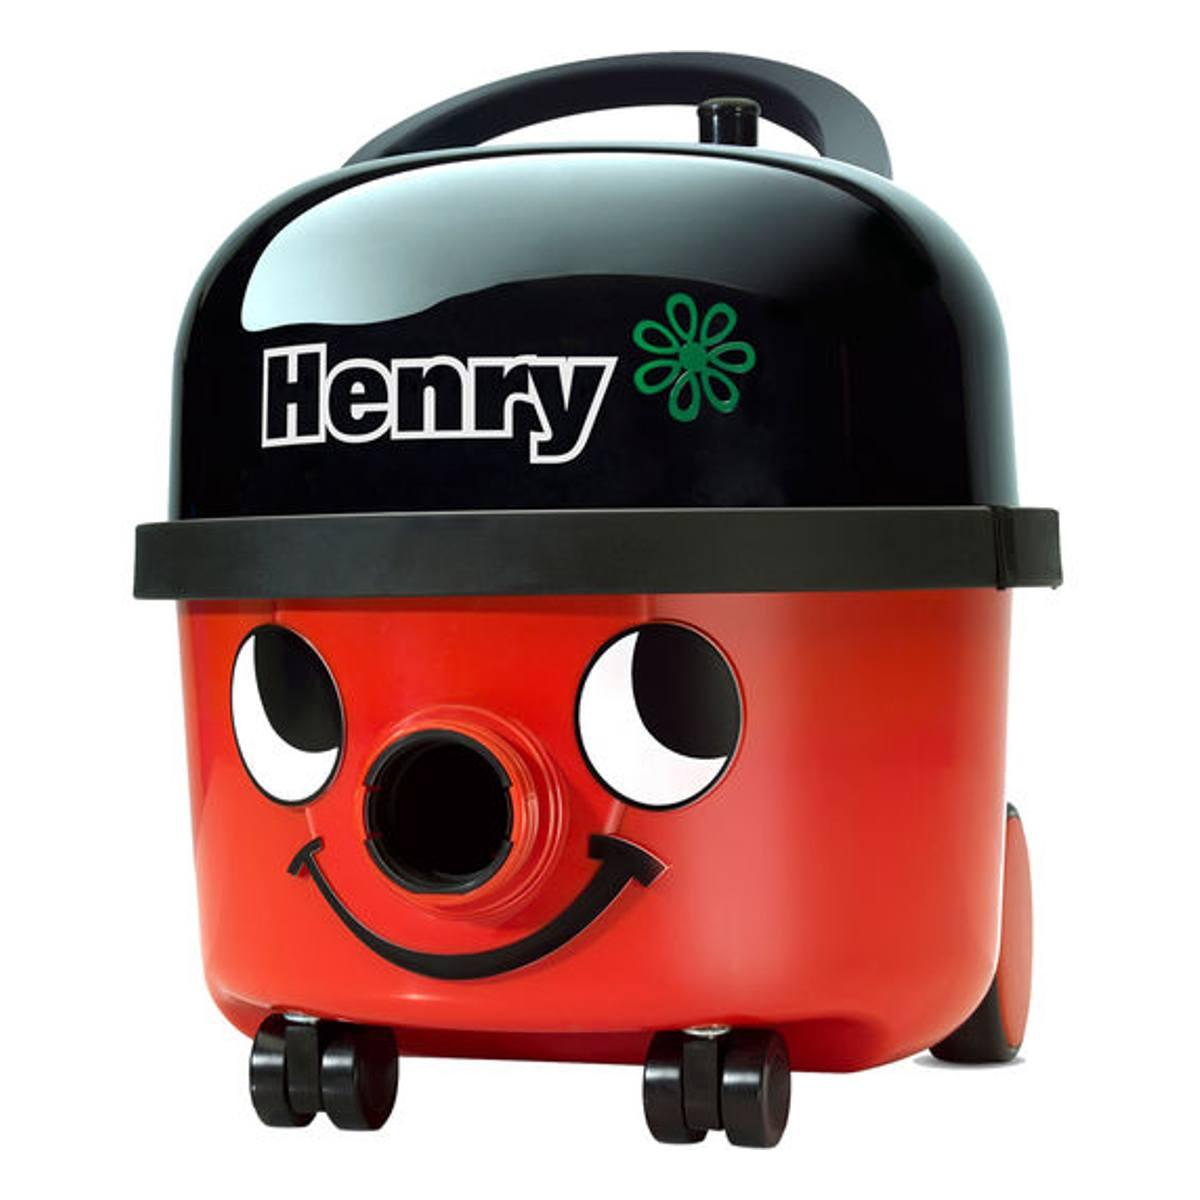 Henry Bagged Cylinder Vacuum Cleaner - Red from DID Electrical - guaranteed Irish, guaranteed quality service. (6890746577084)